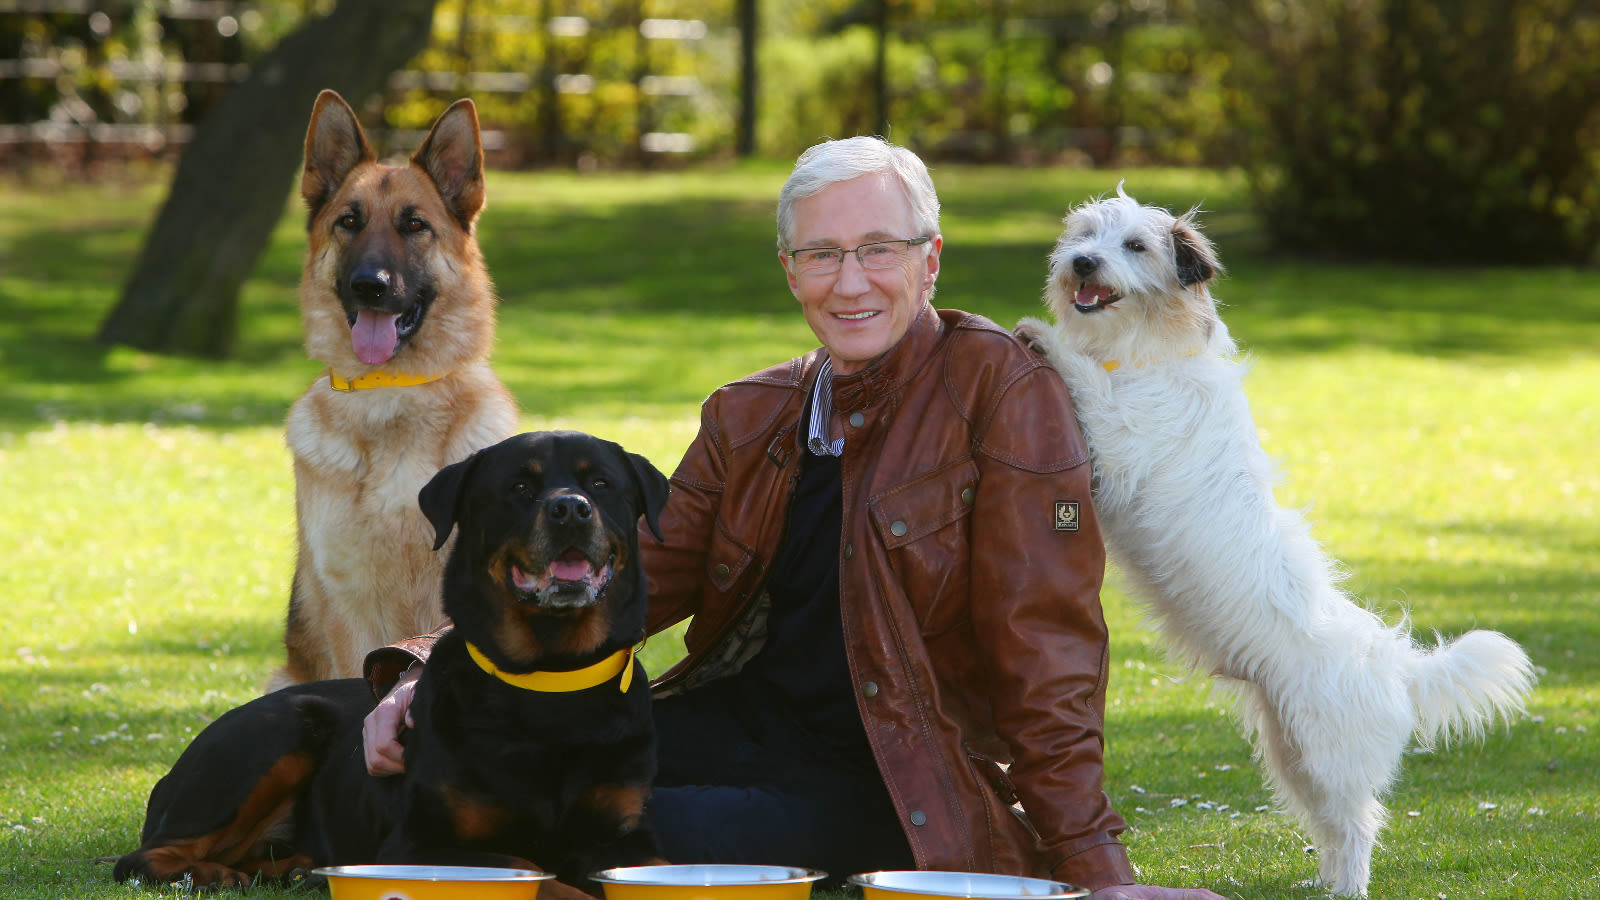 Paul O'Grady wins National Television Award six months after death ...